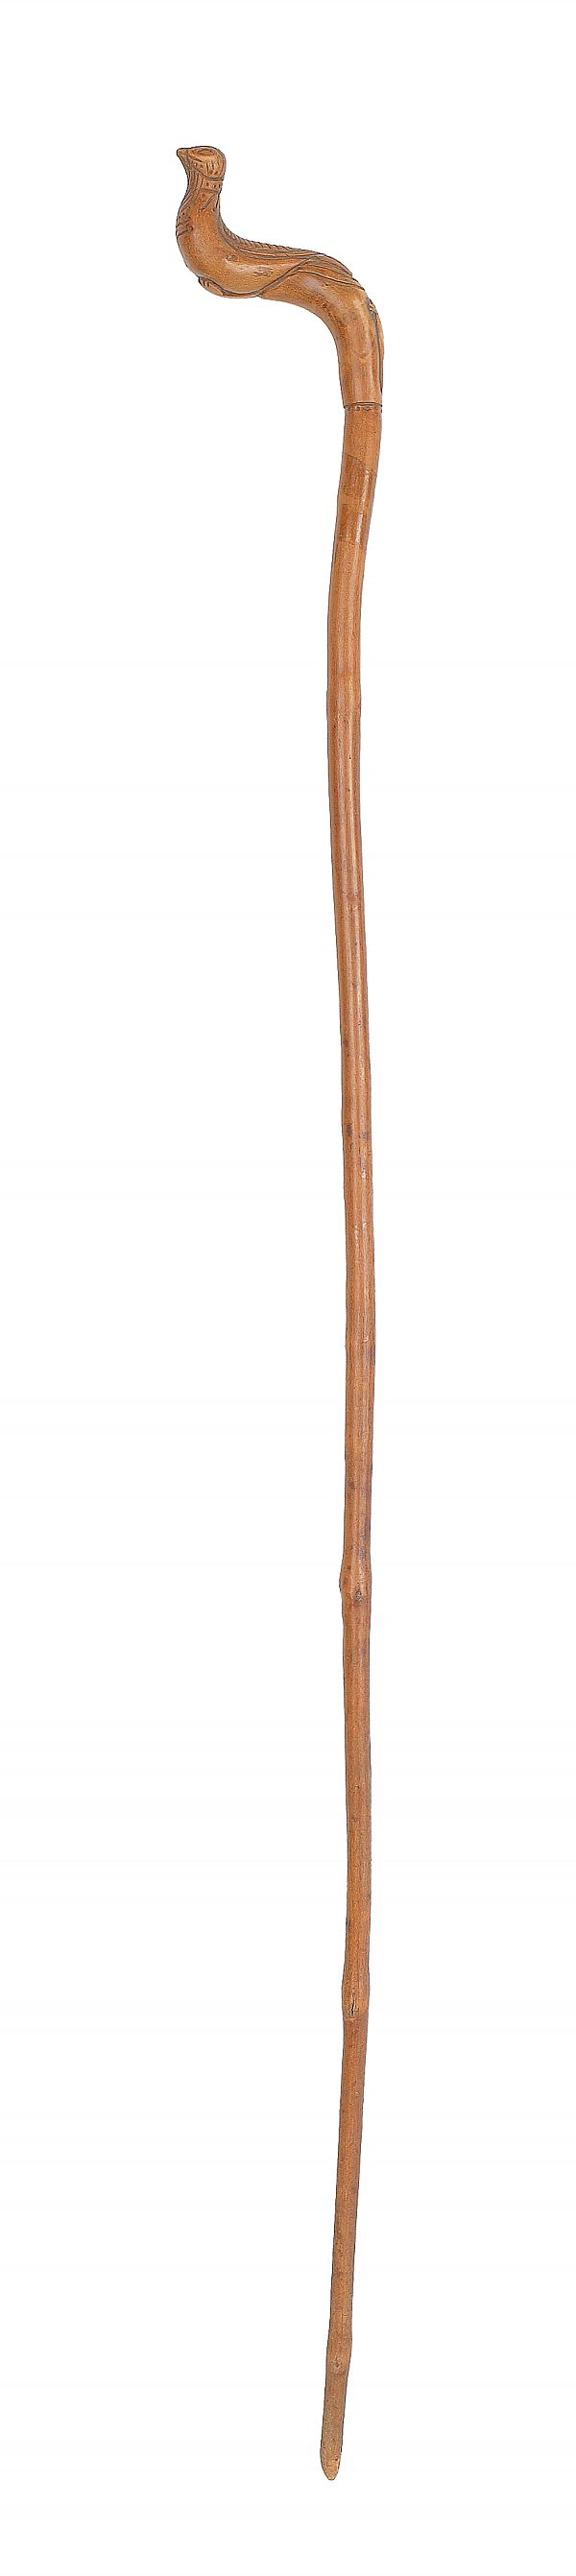 Carved cane late 19th c. with a